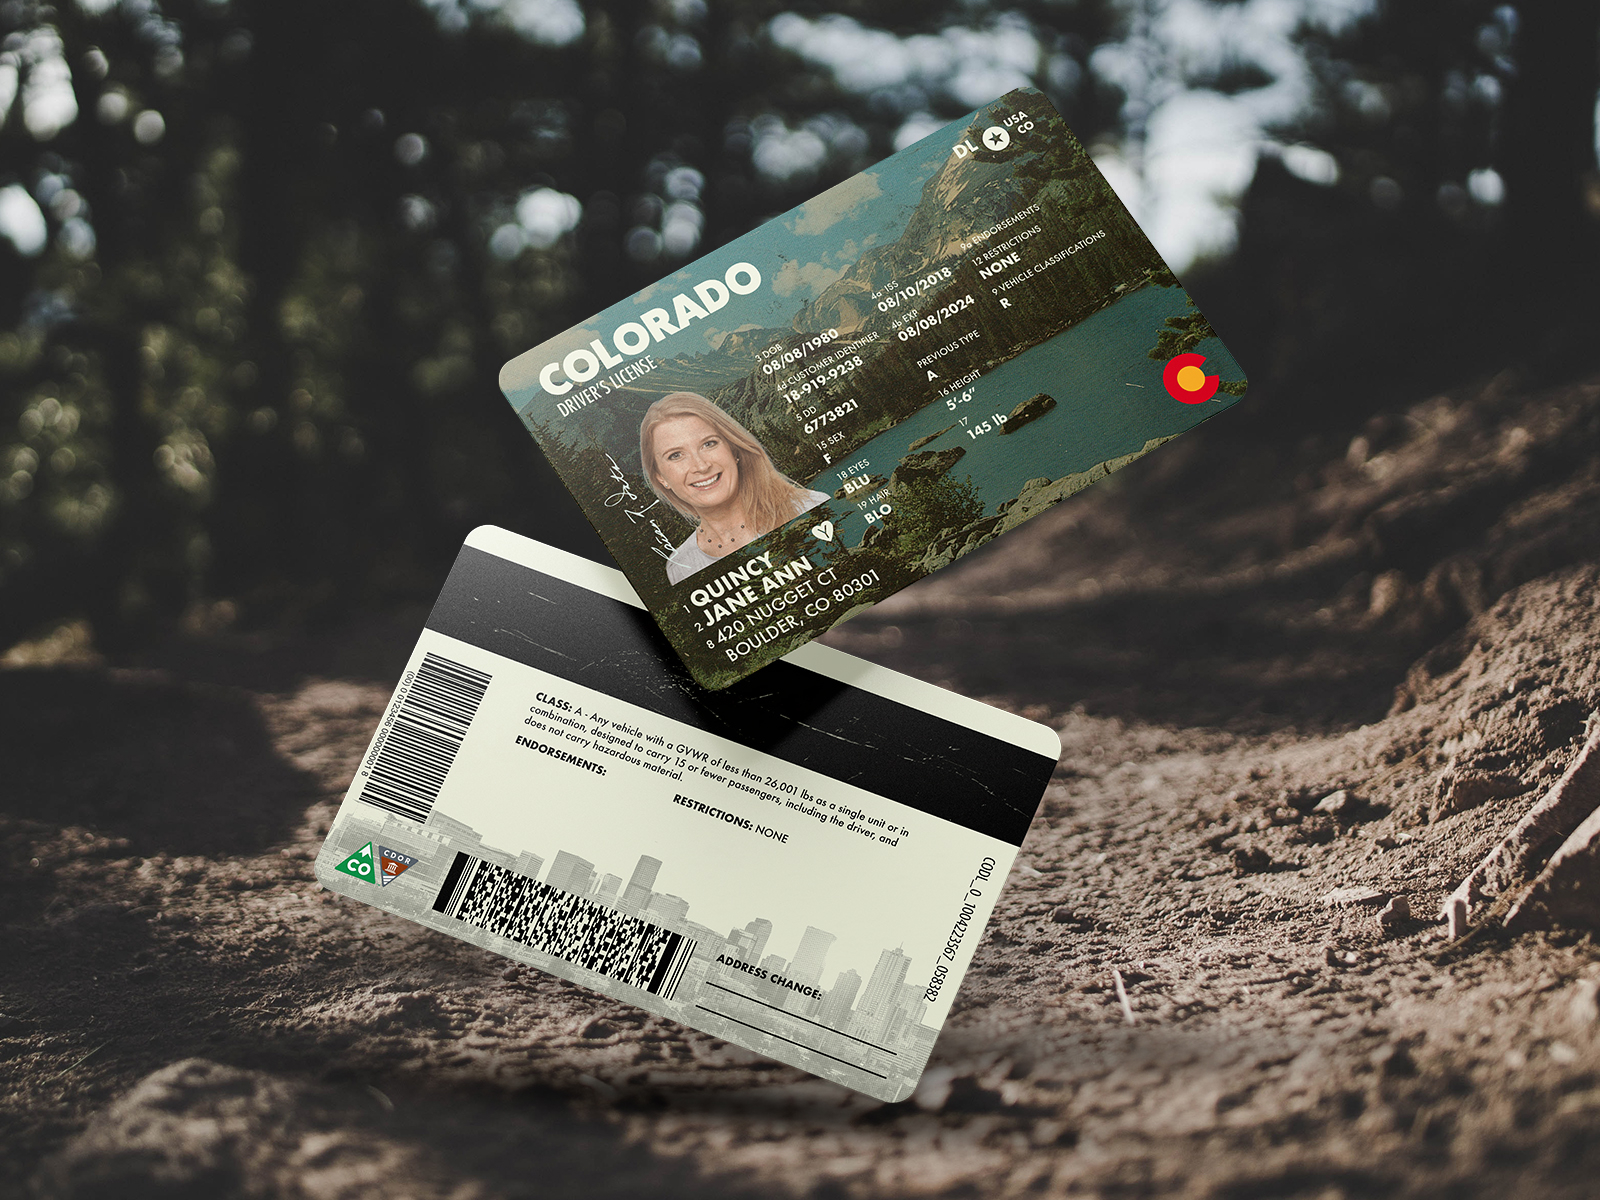 Download Colorado Drivers License By Nearby Studio On Dribbble